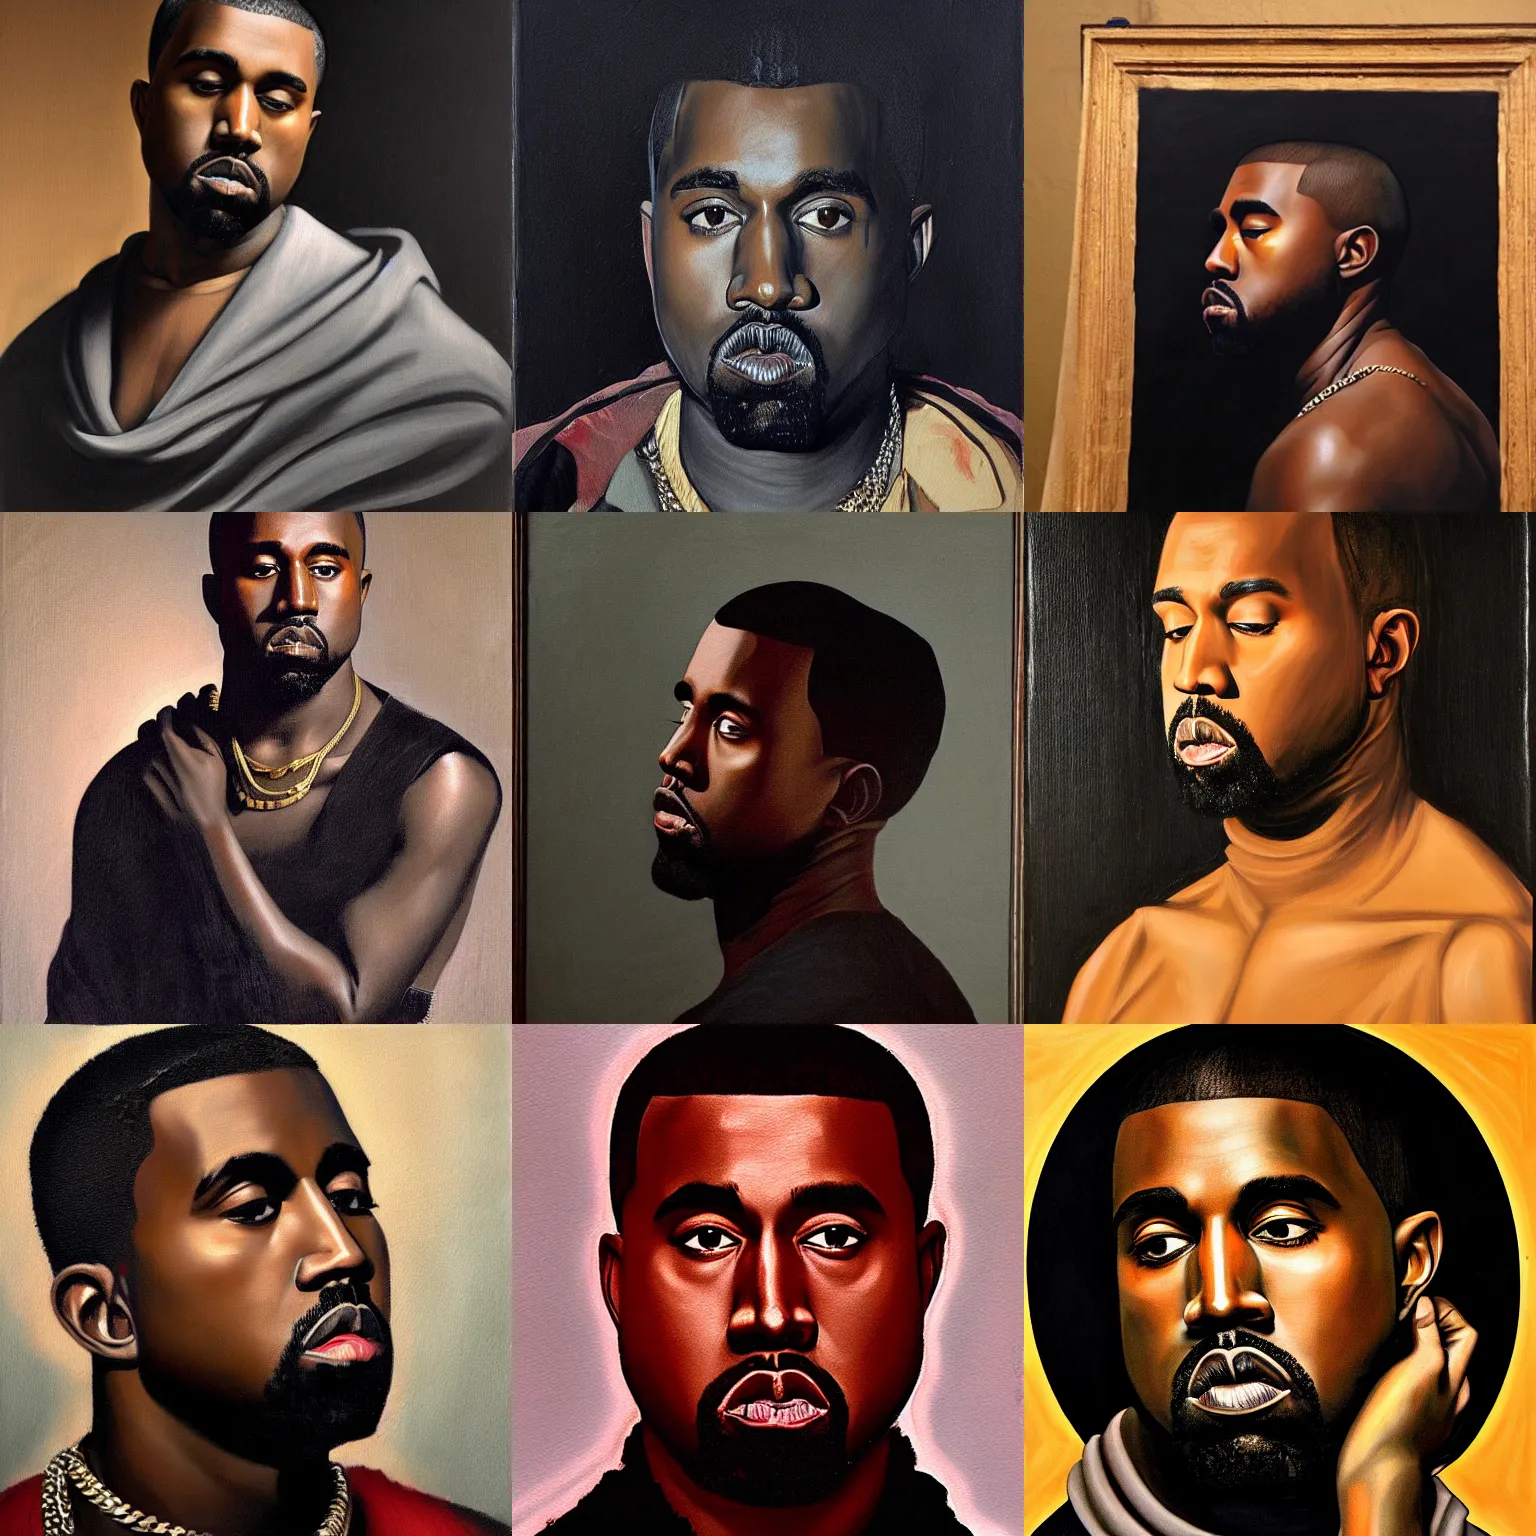 a tenebrism painting of kanye west by caravaggio | Stable Diffusion ...